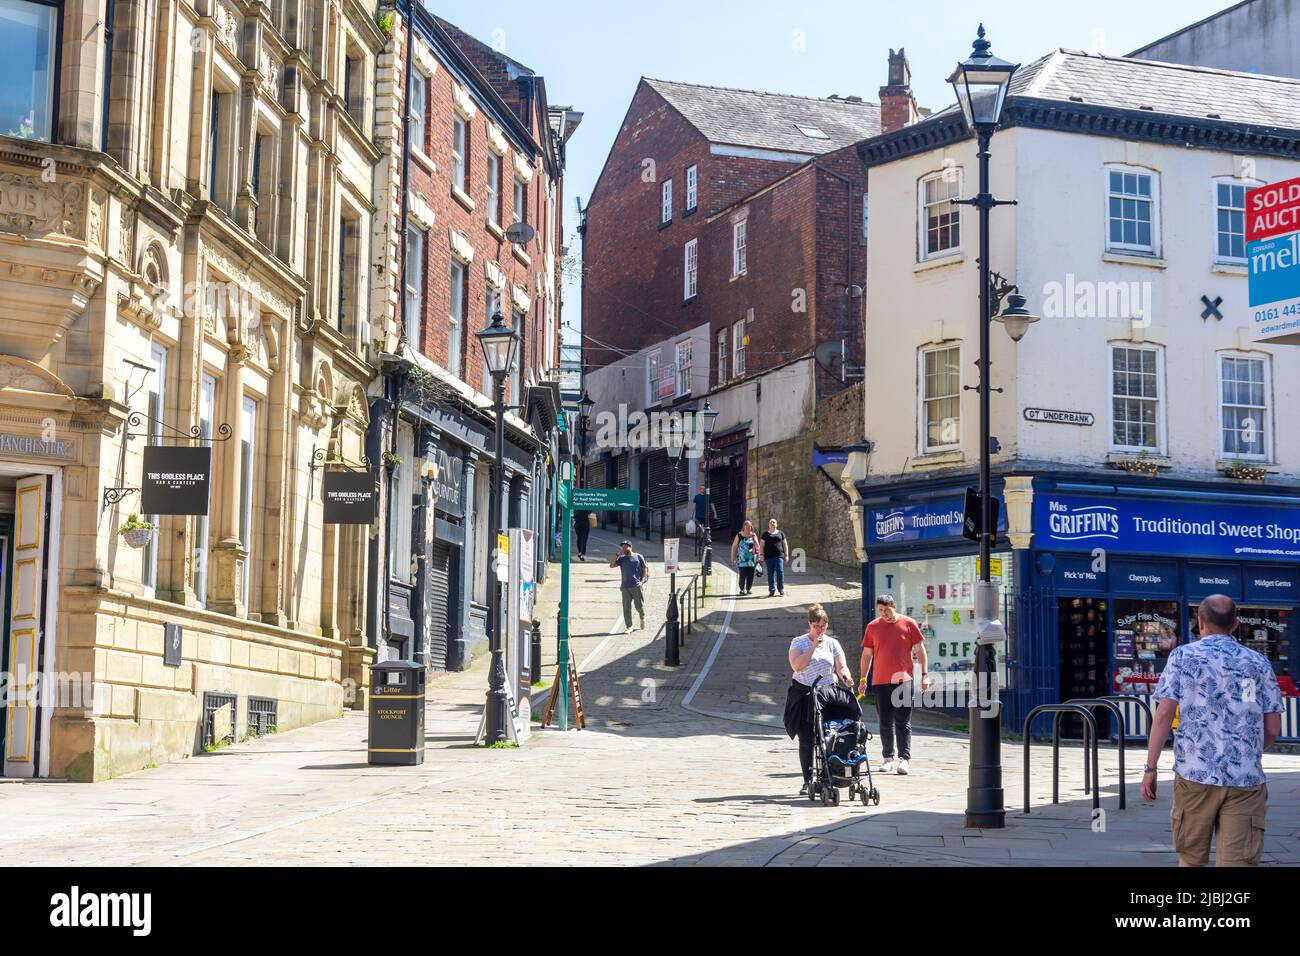 Great Underbank, Stockport, Greater Manchester, England, United Kingdom Stock Photo